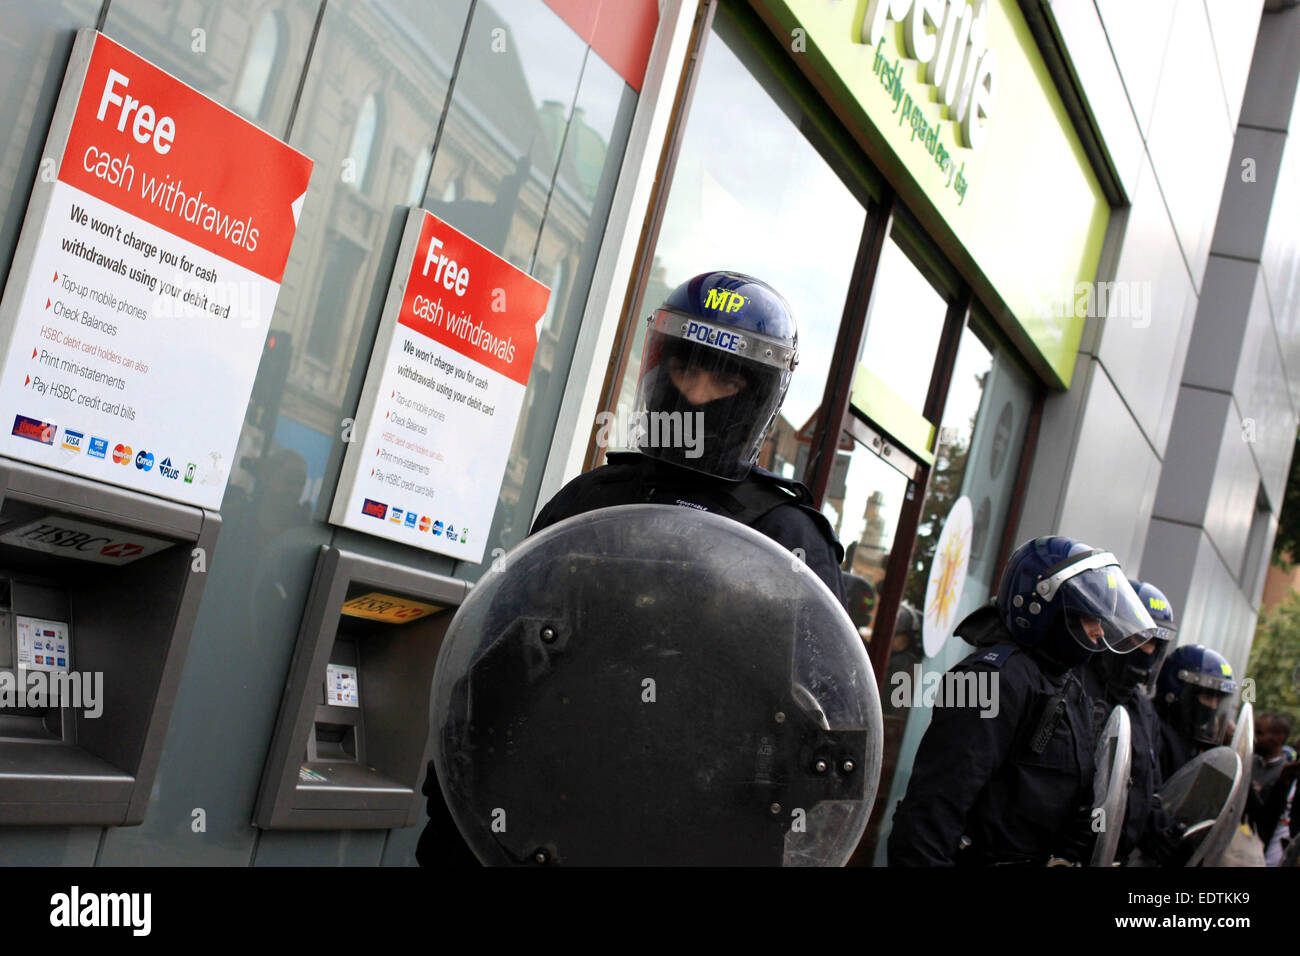 Riot police guarding a bank and shops in Hackney during the 2011 riots Stock Photo